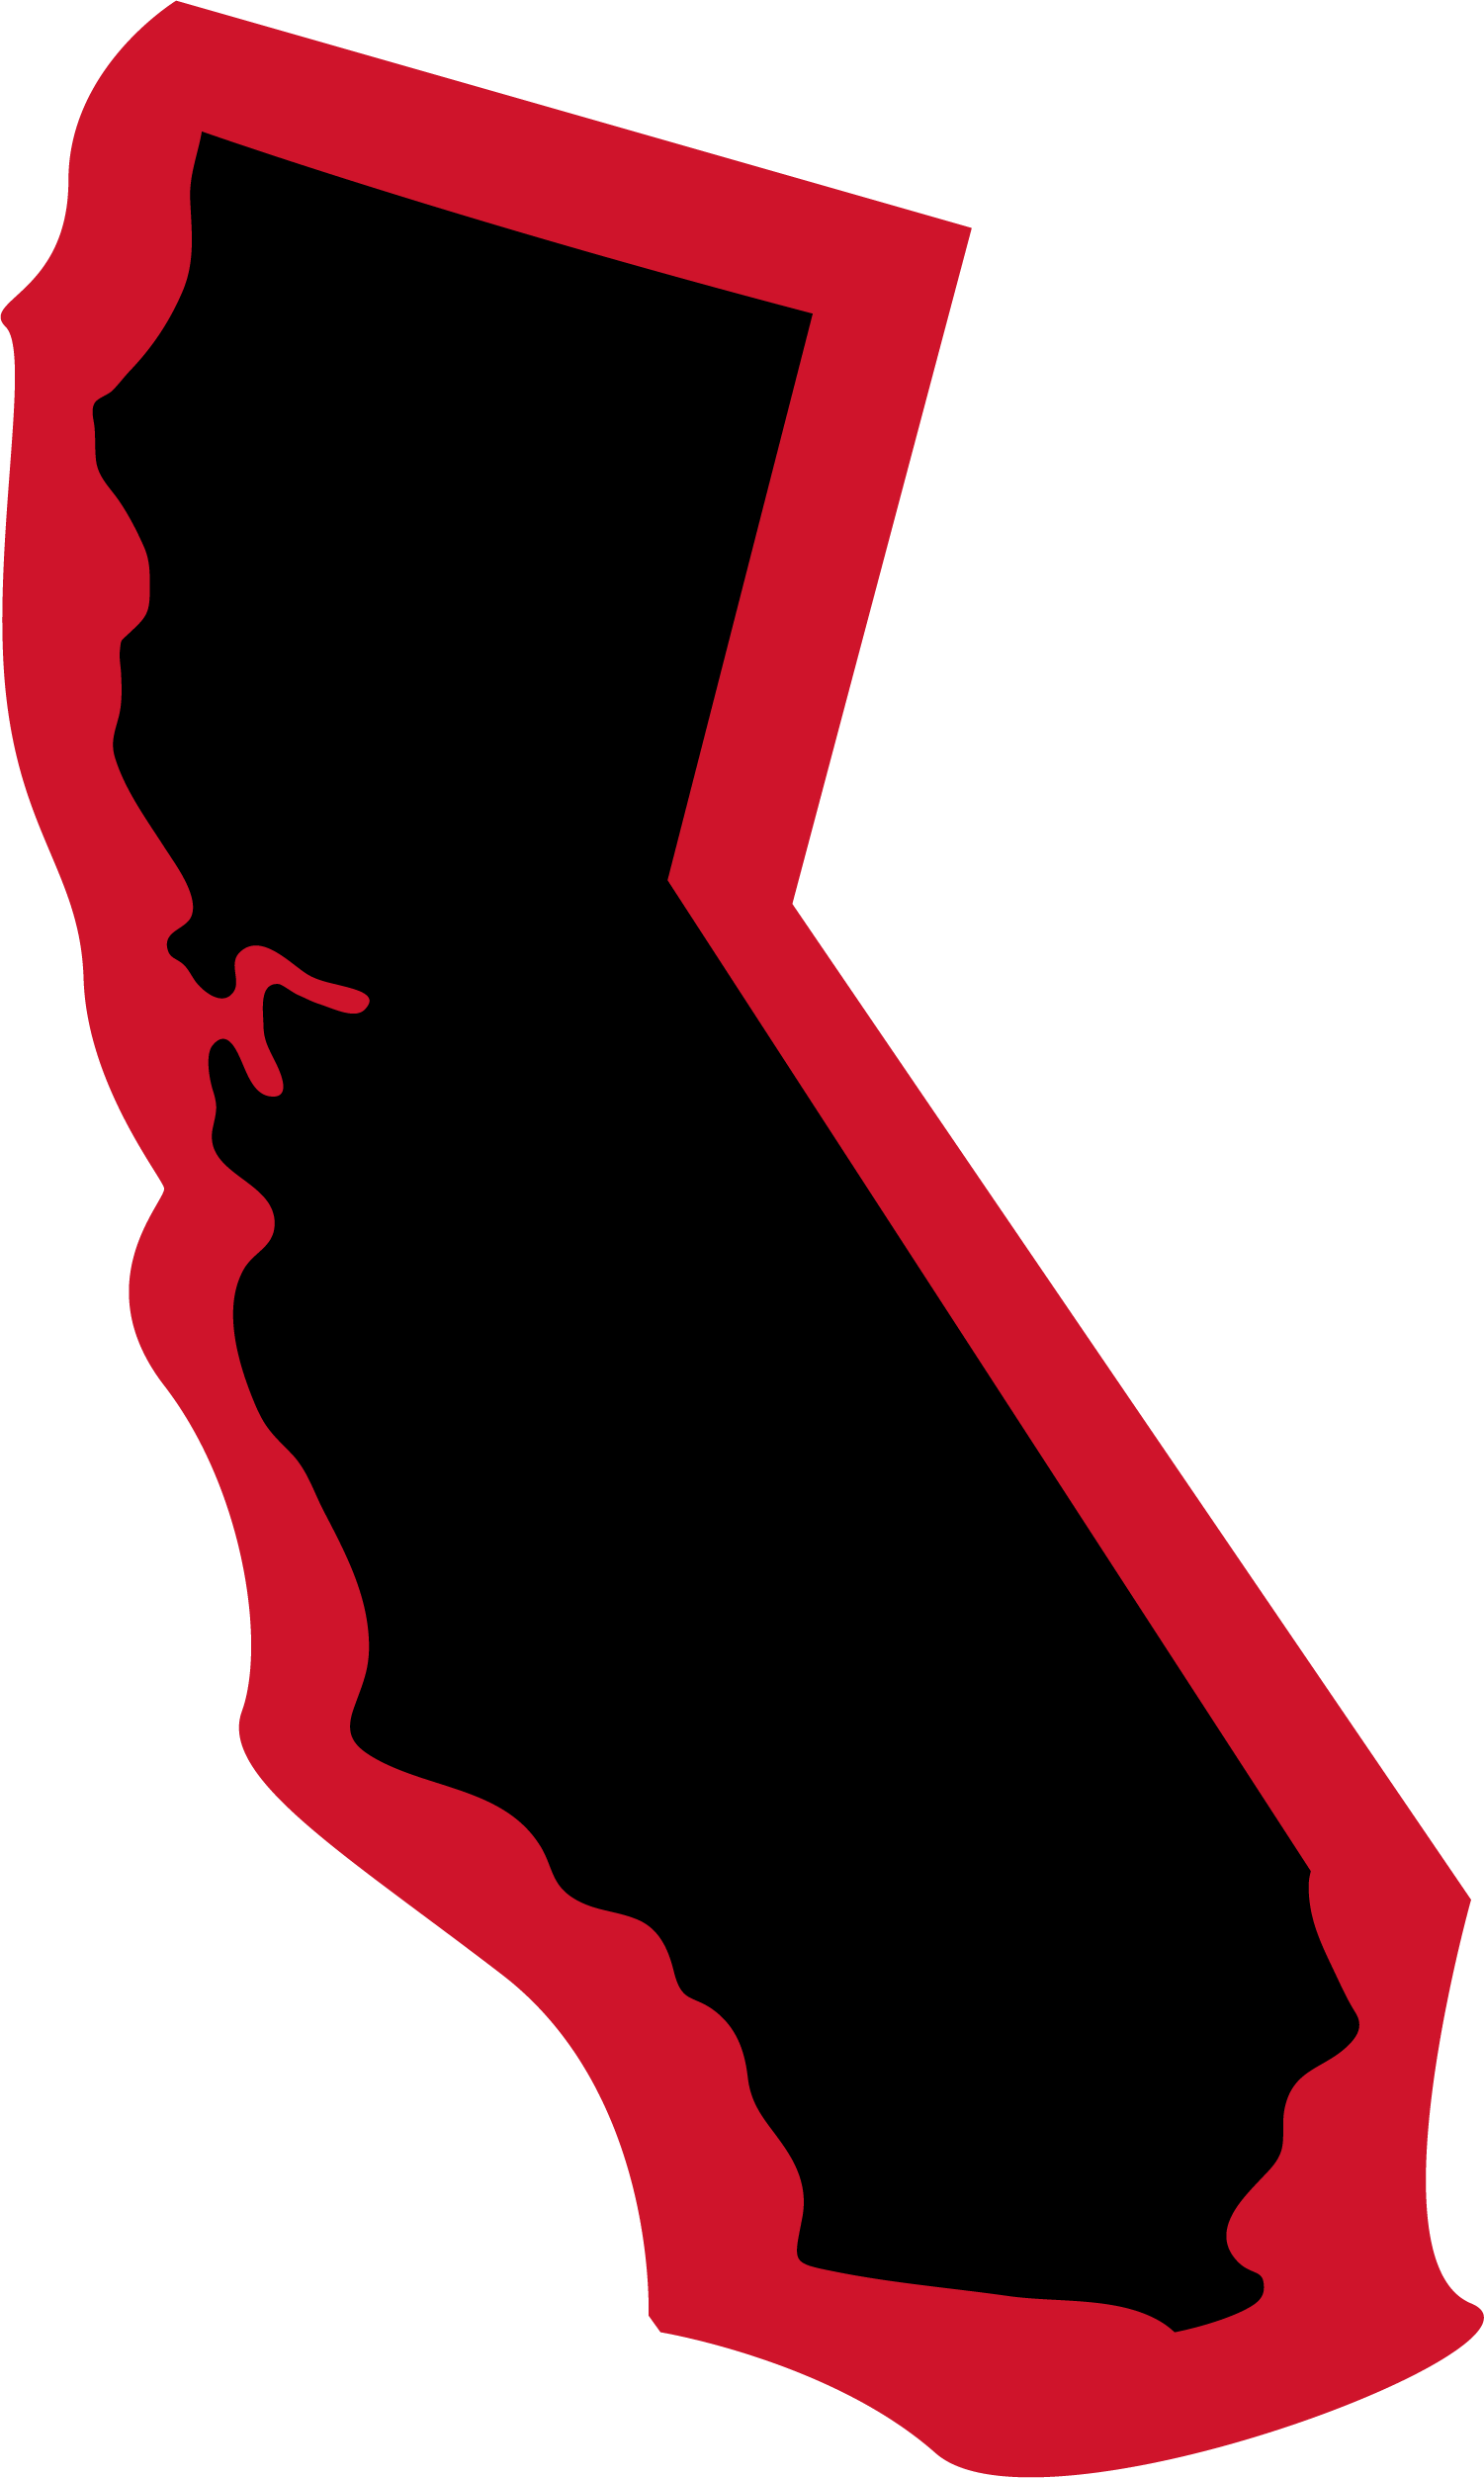 State of California outlined in red